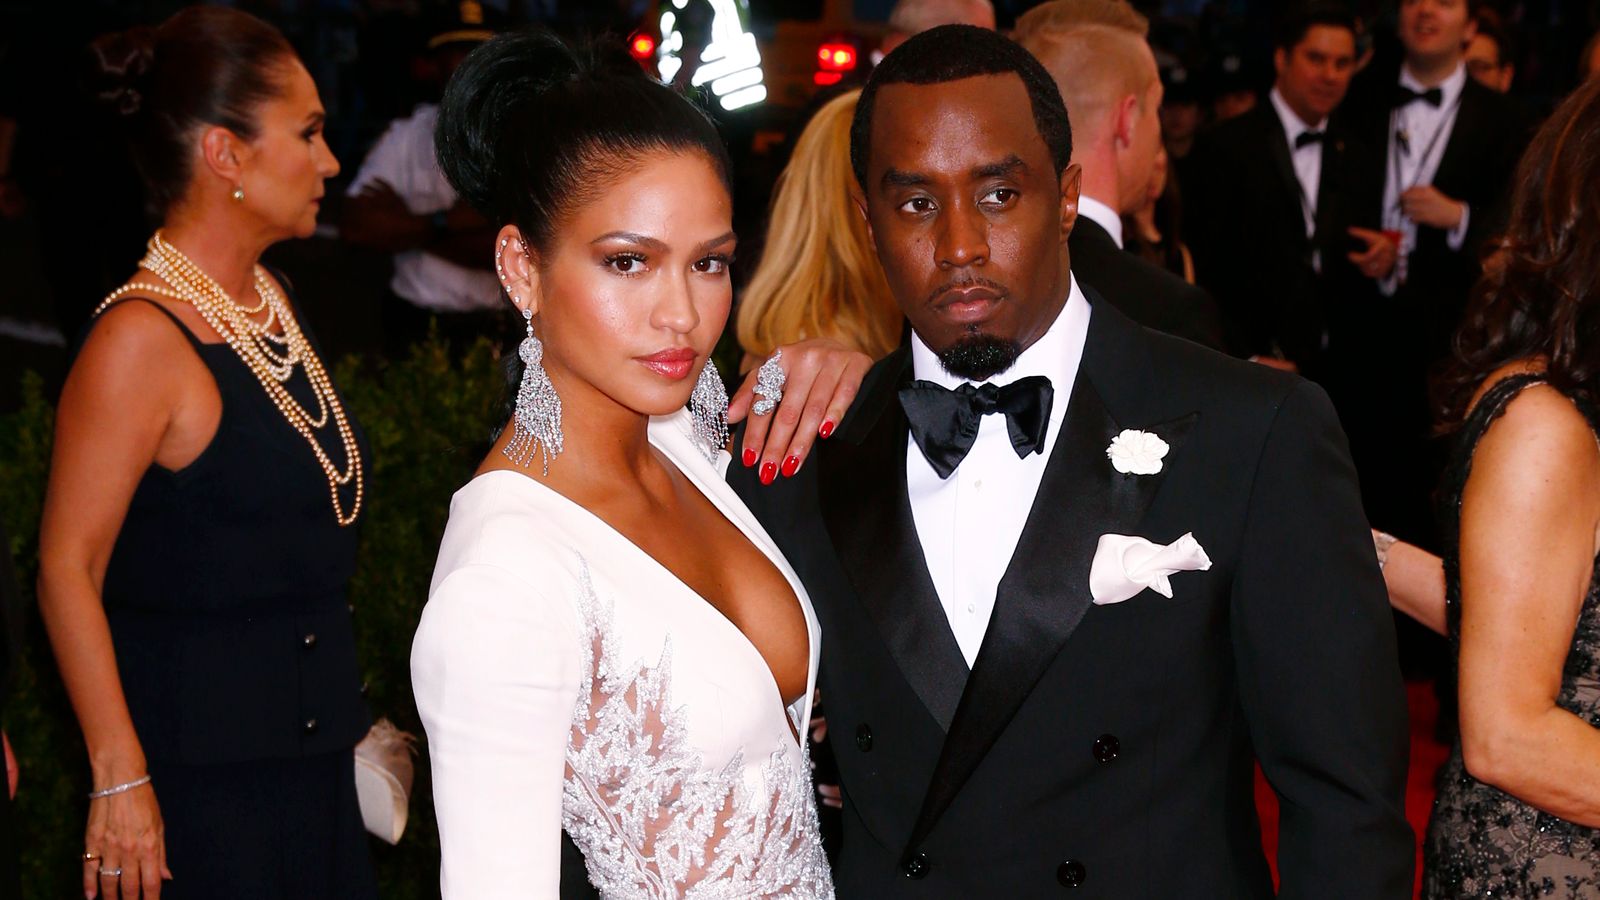 Sean Combs accused of sex trafficking and assault by ex-girlfriend Cassie